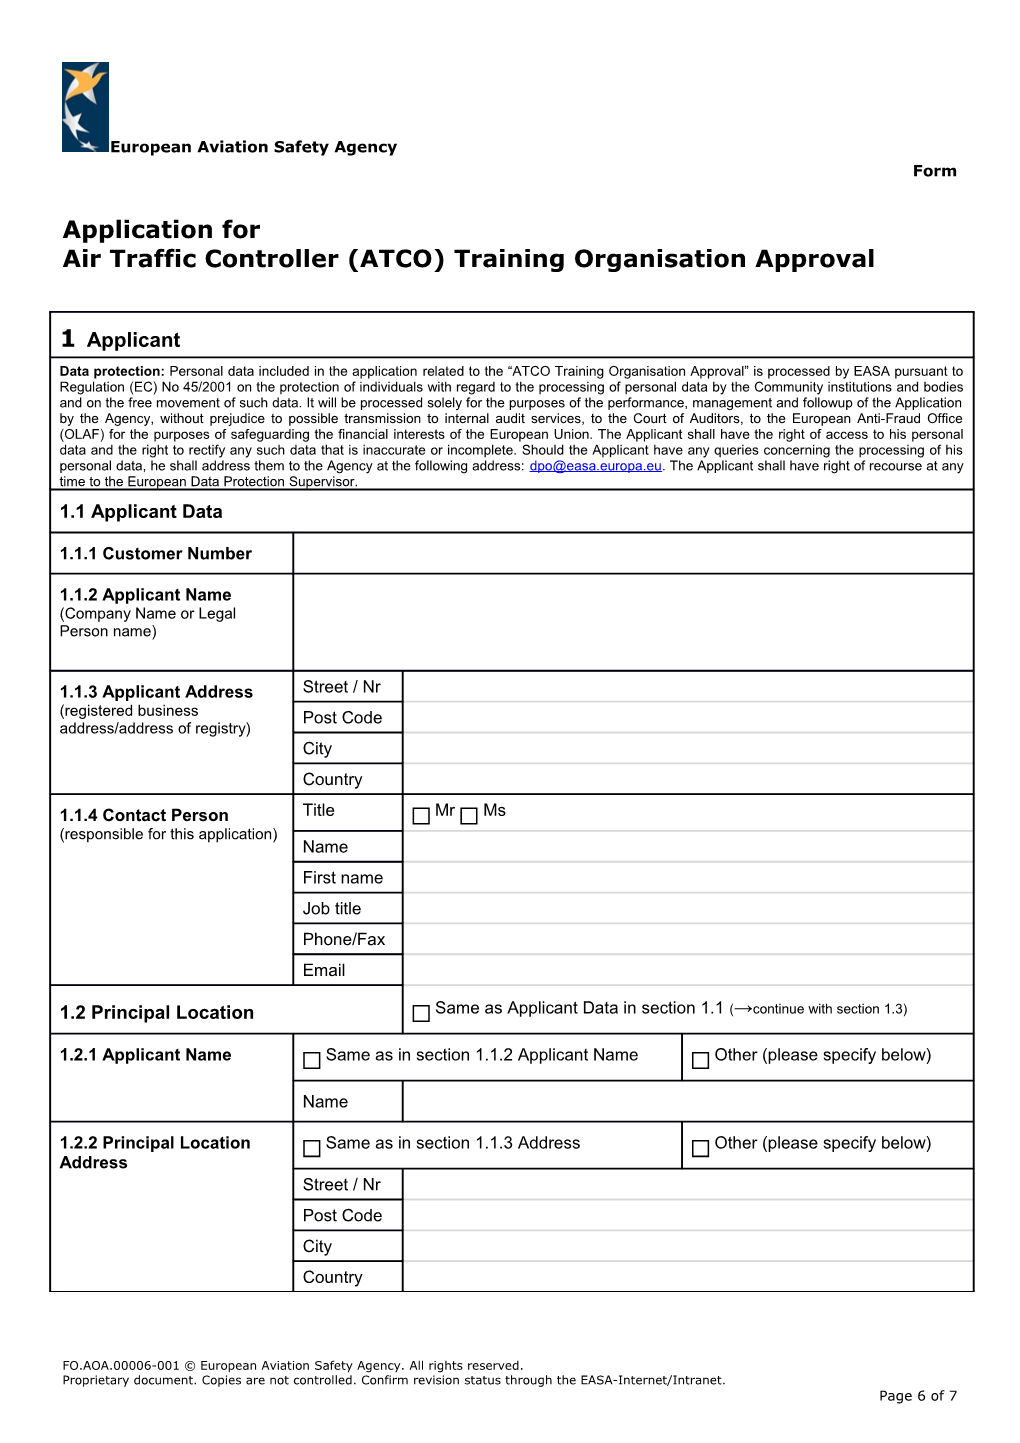 ATCO Training Organisation Approval